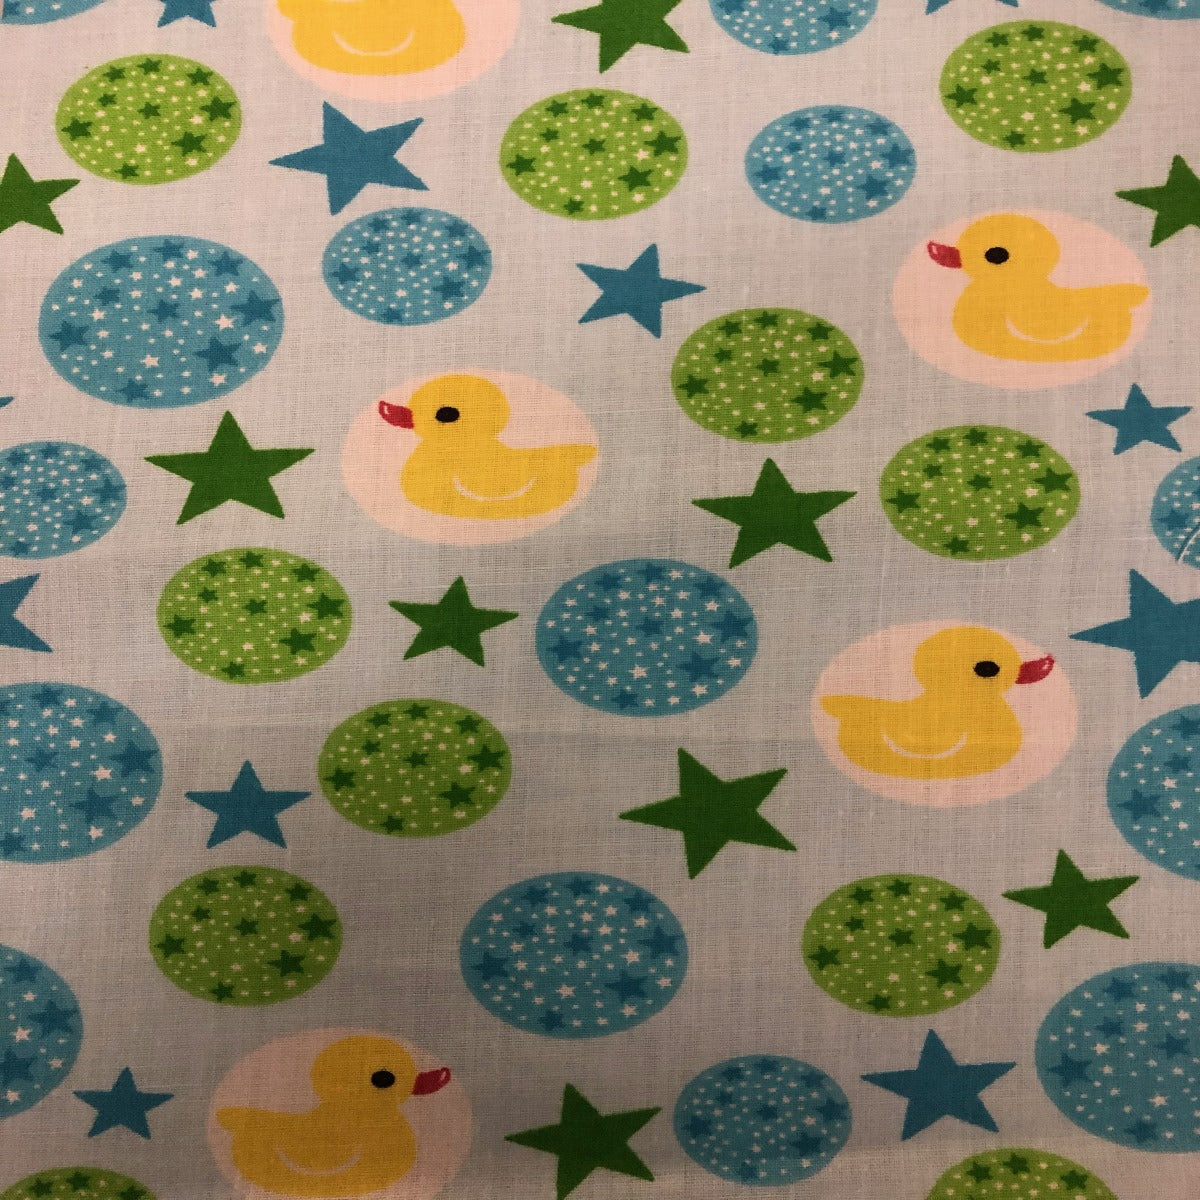 Blue Green Rubber Ducky Print Poly Cotton Fabric - Fashion Fabrics Los Angeles 